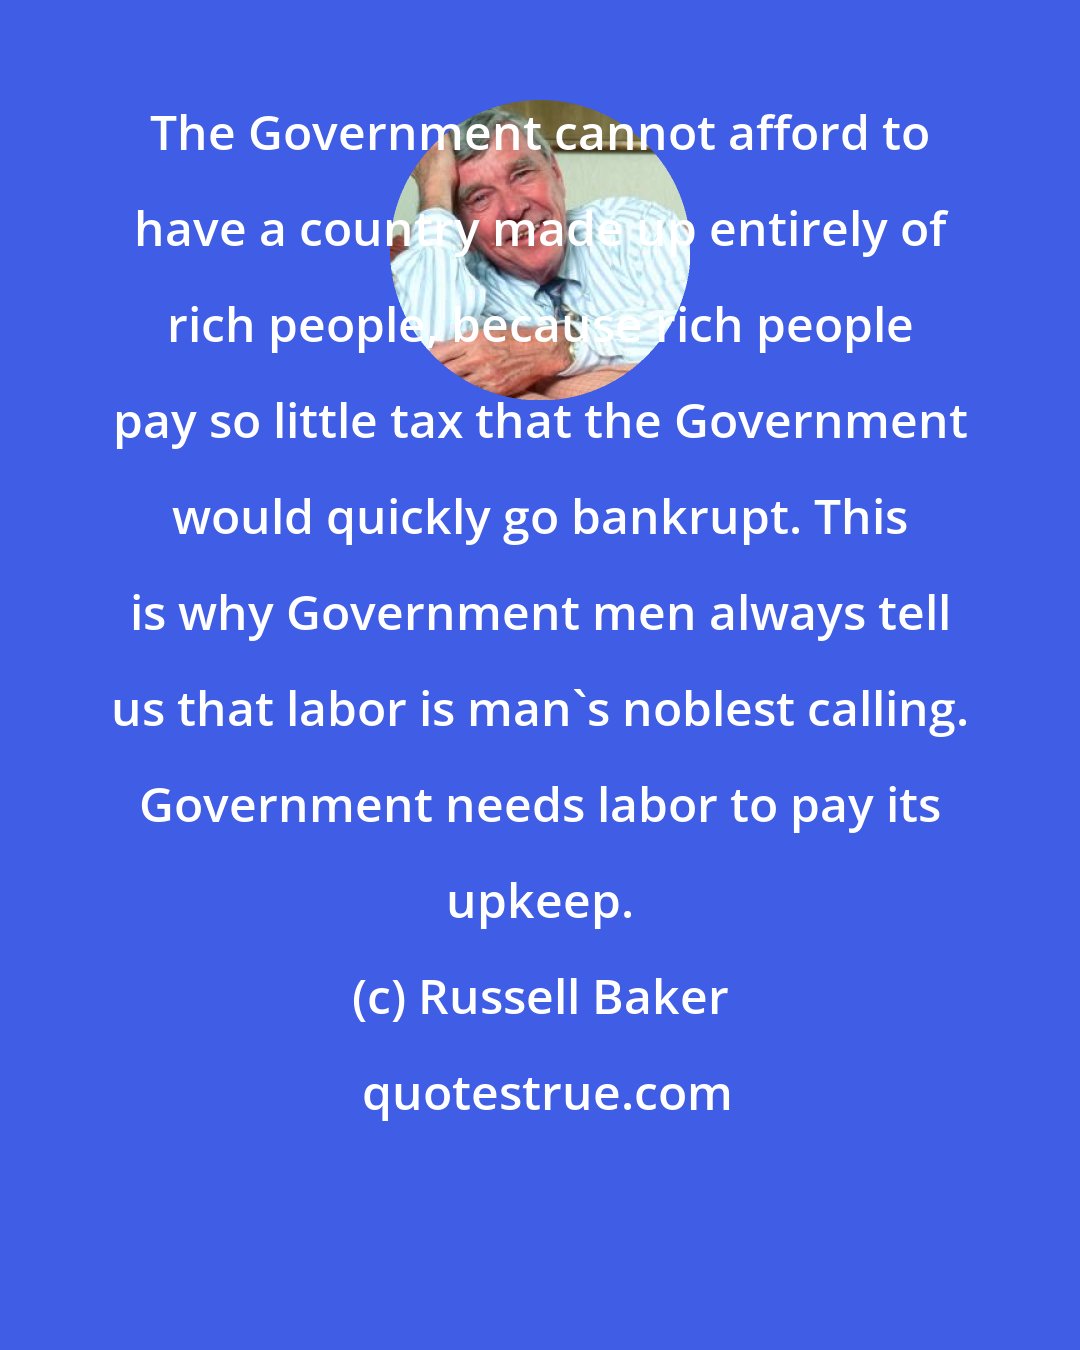 Russell Baker: The Government cannot afford to have a country made up entirely of rich people, because rich people pay so little tax that the Government would quickly go bankrupt. This is why Government men always tell us that labor is man's noblest calling. Government needs labor to pay its upkeep.